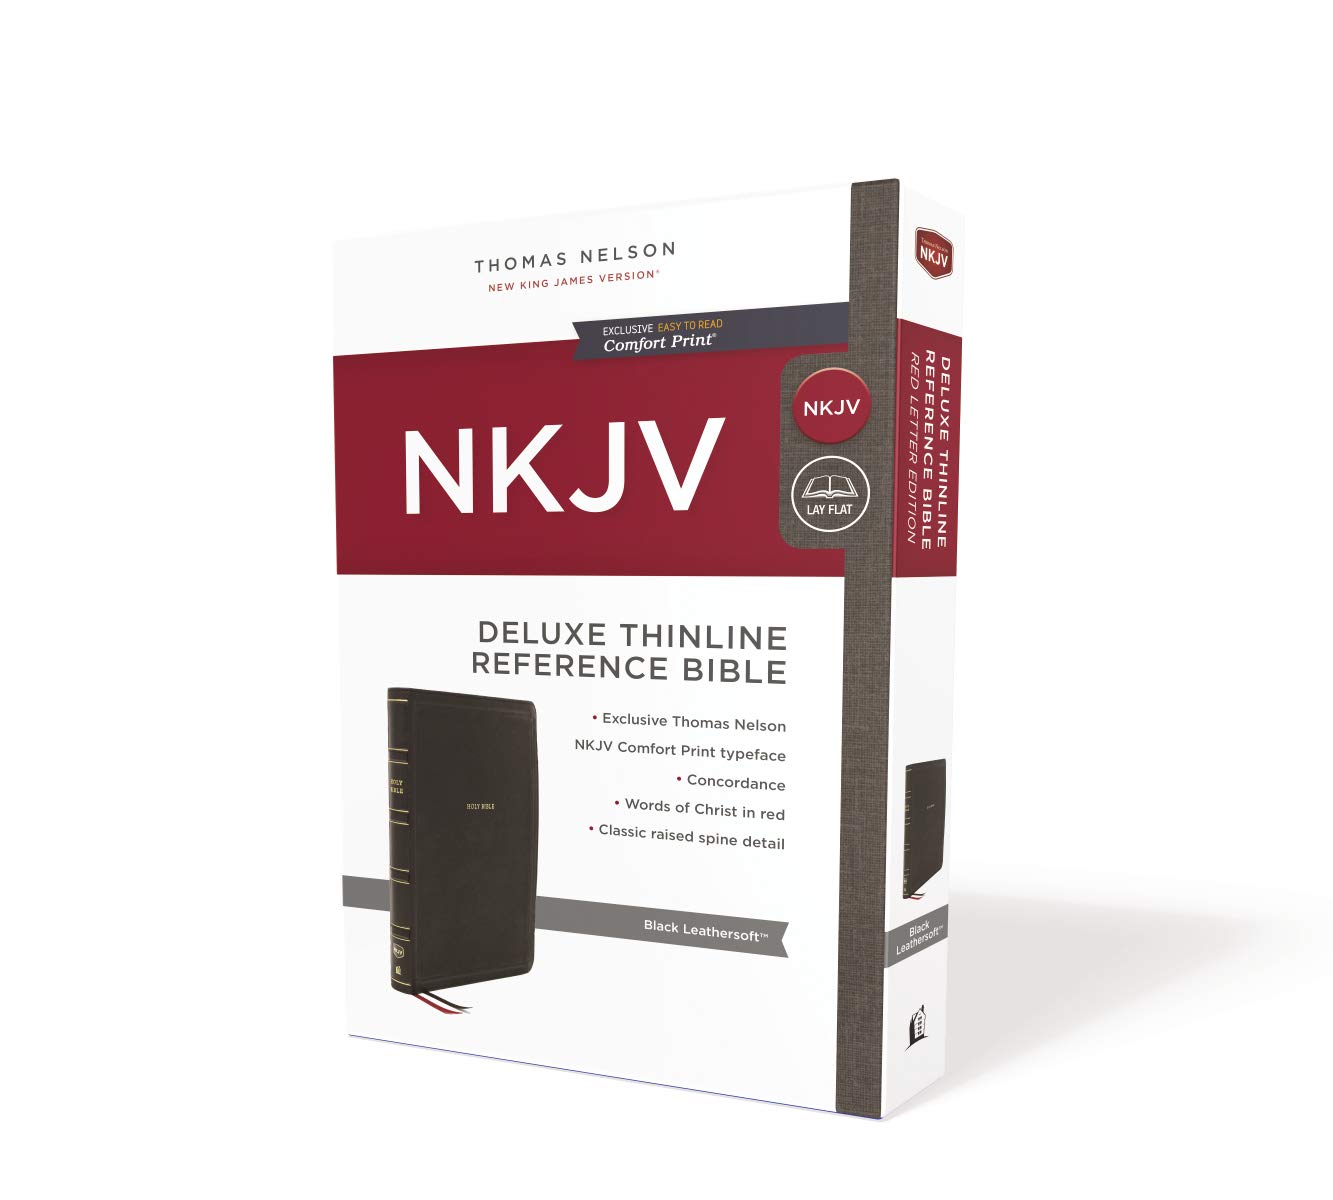 NKJV Deluxe Thinline Reference Bible Comfort Print